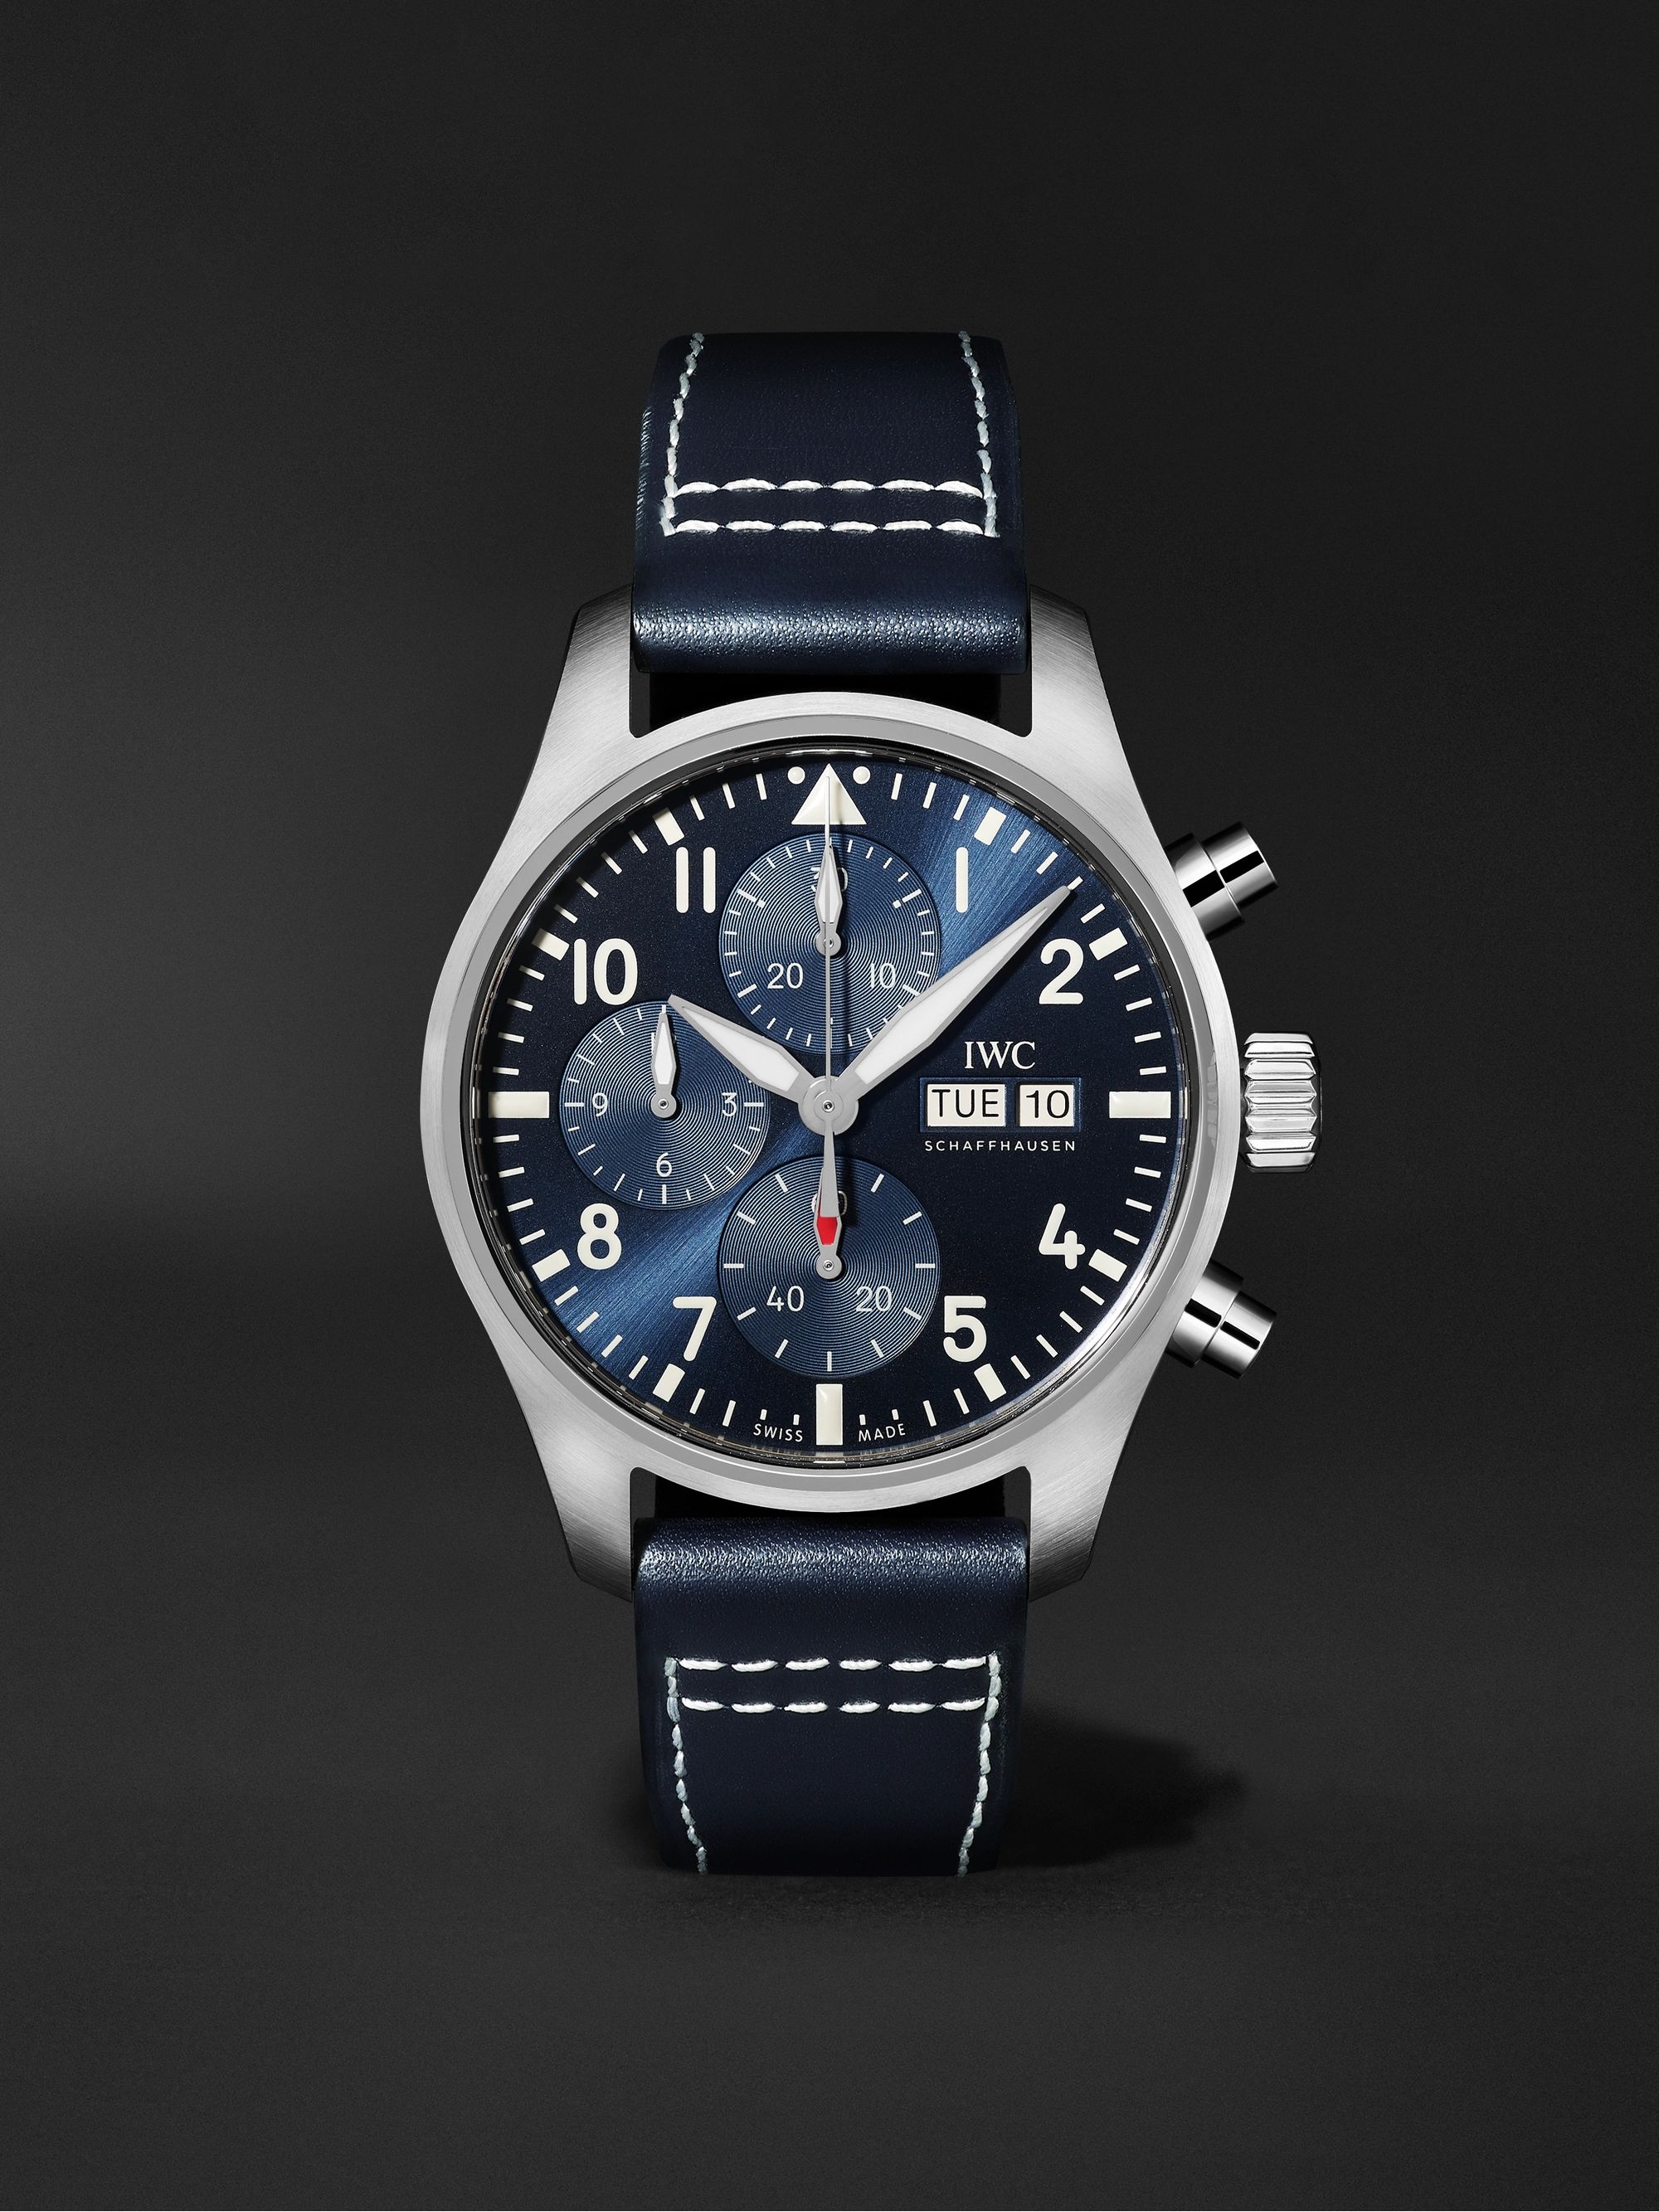 IWC SCHAFFHAUSEN Pilot's Watch Automatic Chronograph 41mm Stainless Steel  and Leather Watch, Ref. No. IW388101 | MR PORTER